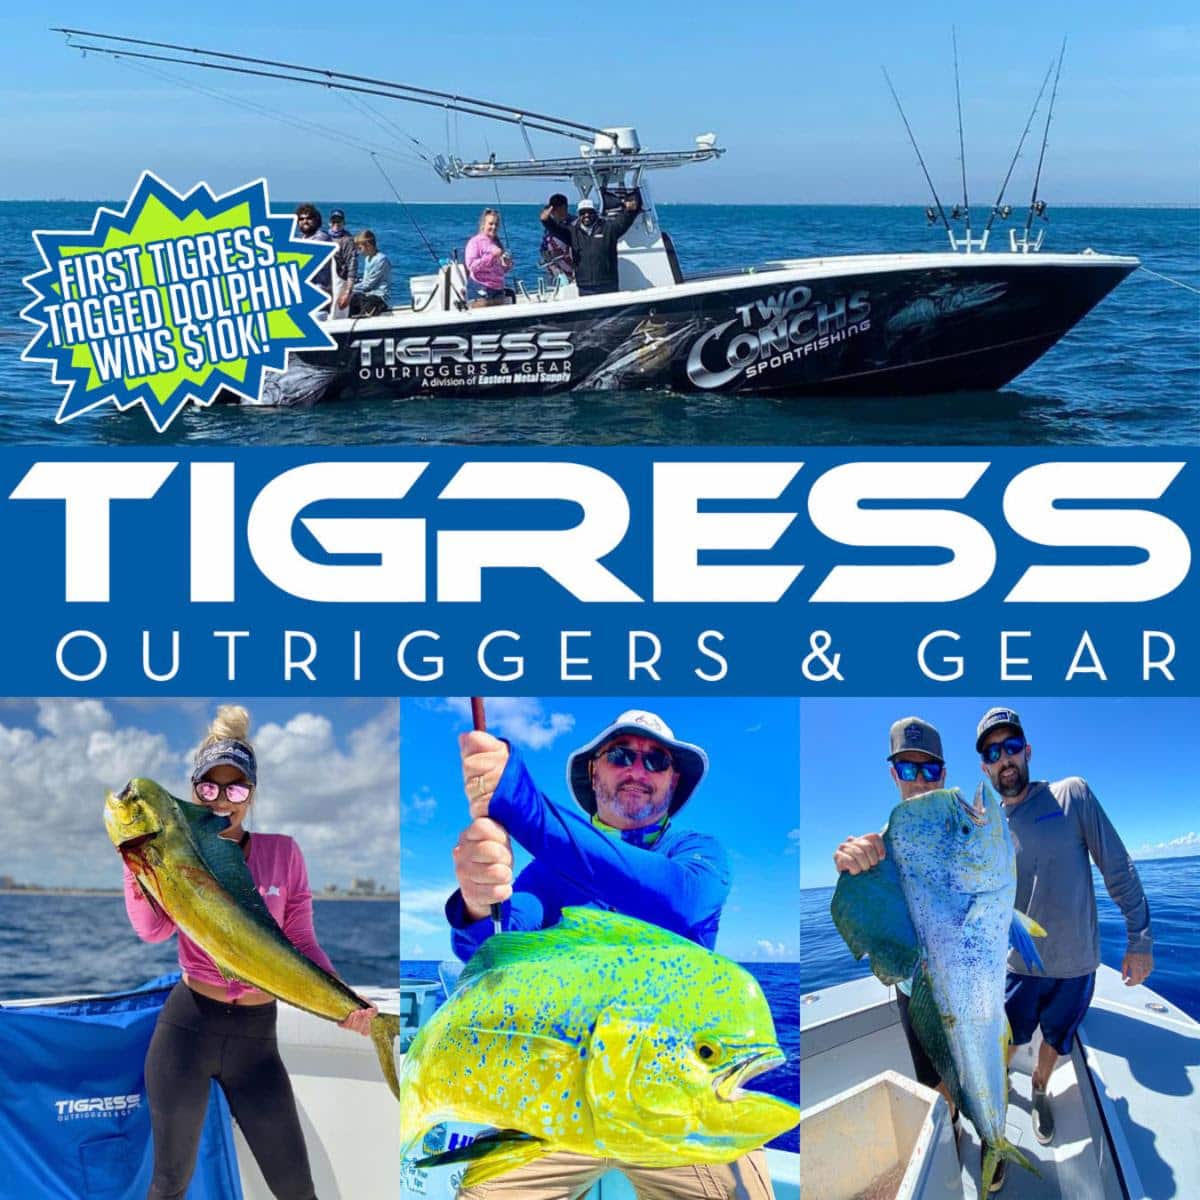 Catch the First TigressTagged Dolphin in the CCA Florida STAR